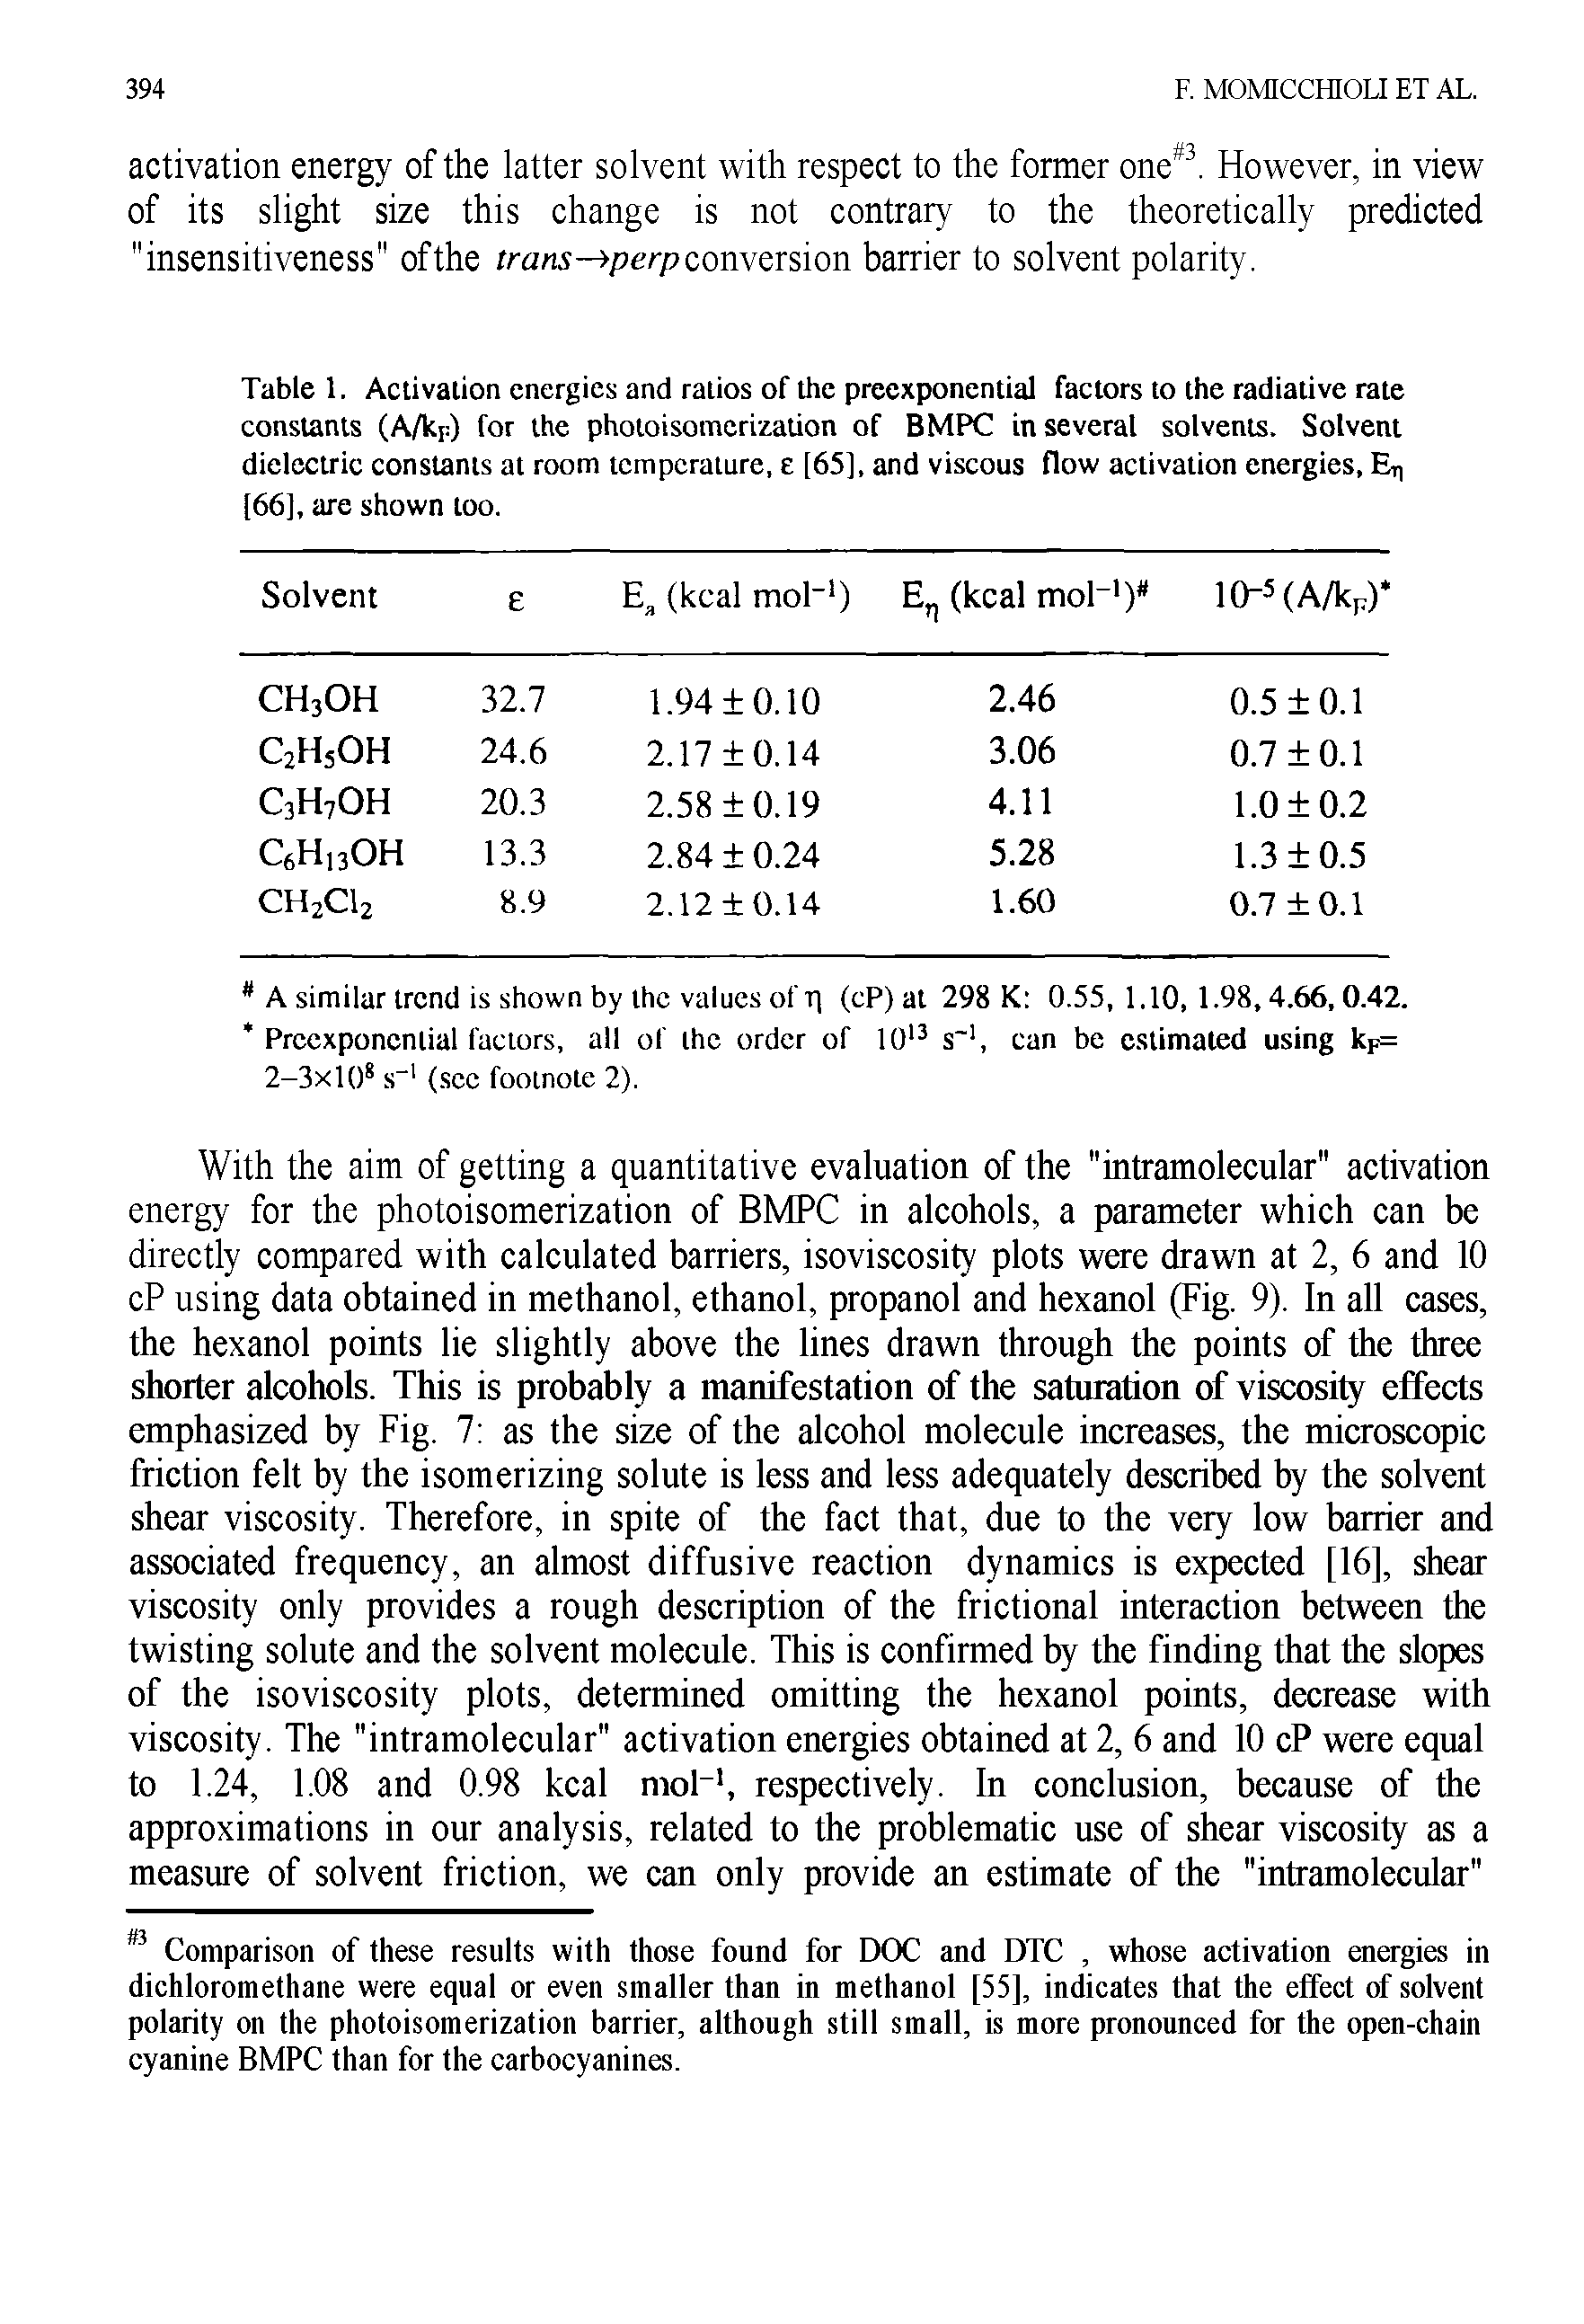 Table 1. Activation energies and ratios of the preexponential factors to the radiative rate constants (A/kp) for the photoisomcrization of BMPC in several solvents. Solvent dielectric constants at room temperature, e [65], and viscous flow activation energies, Eri [66], are shown too.